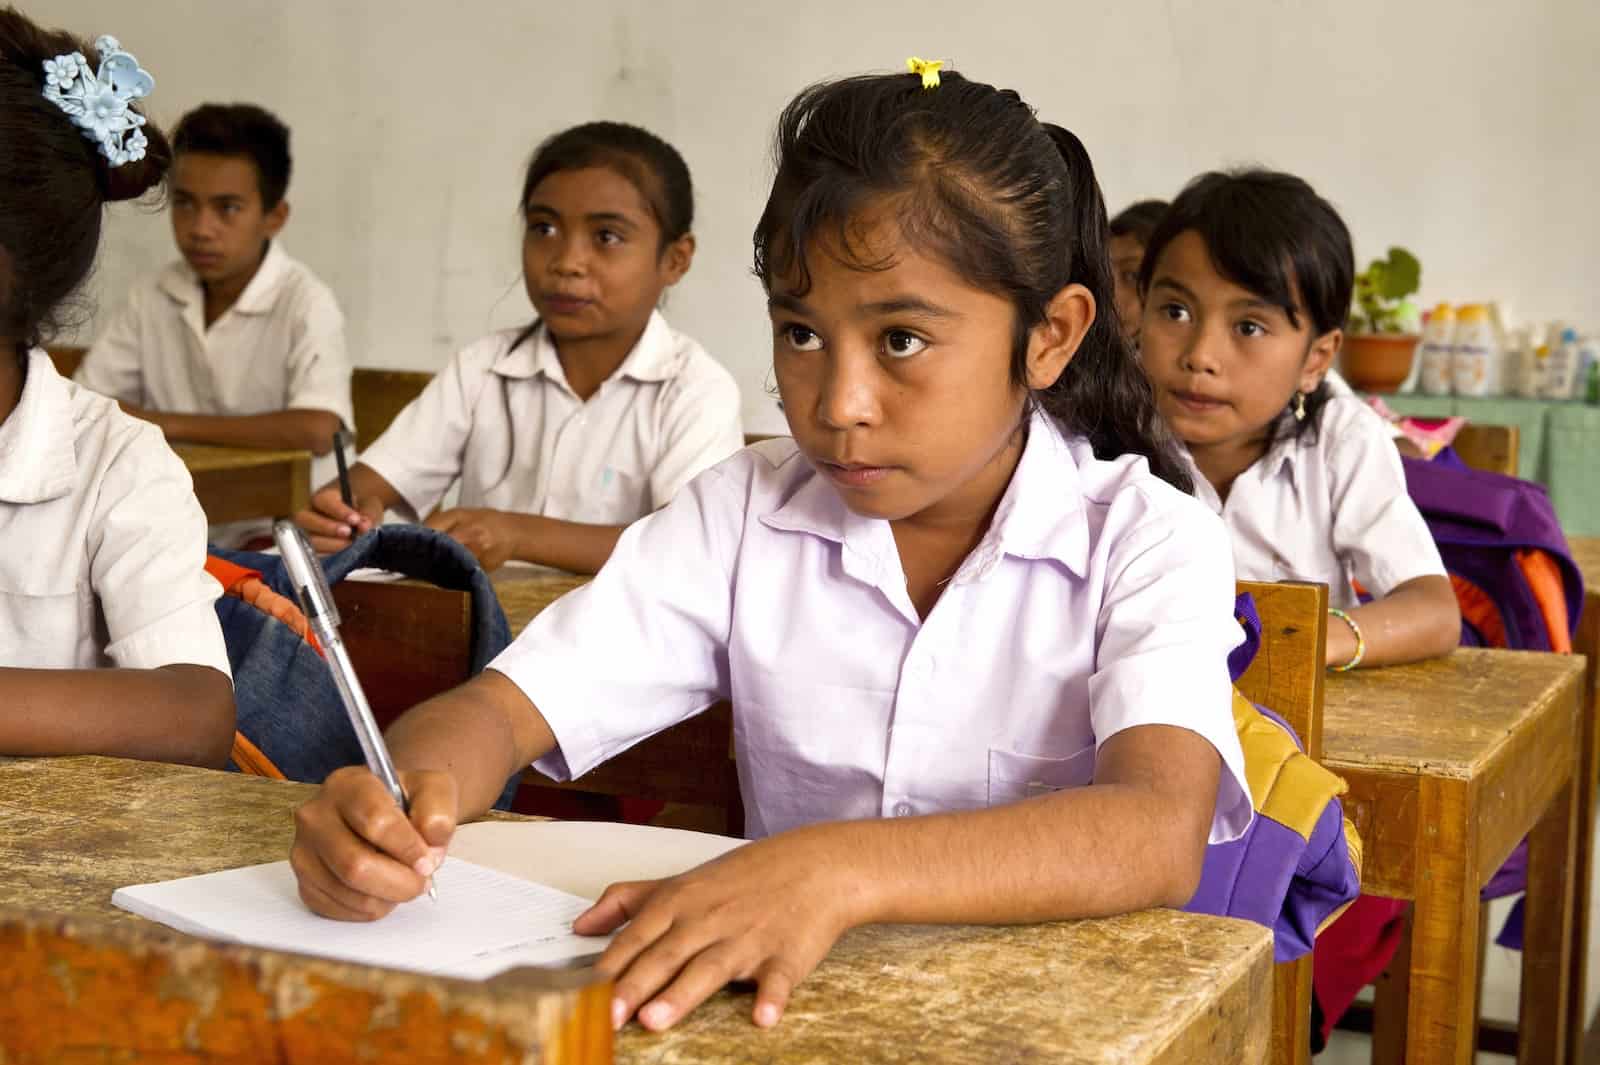 International Literacy Day: A girl sits at a desk, looking at the board in front of her, wearing a white school uniform.